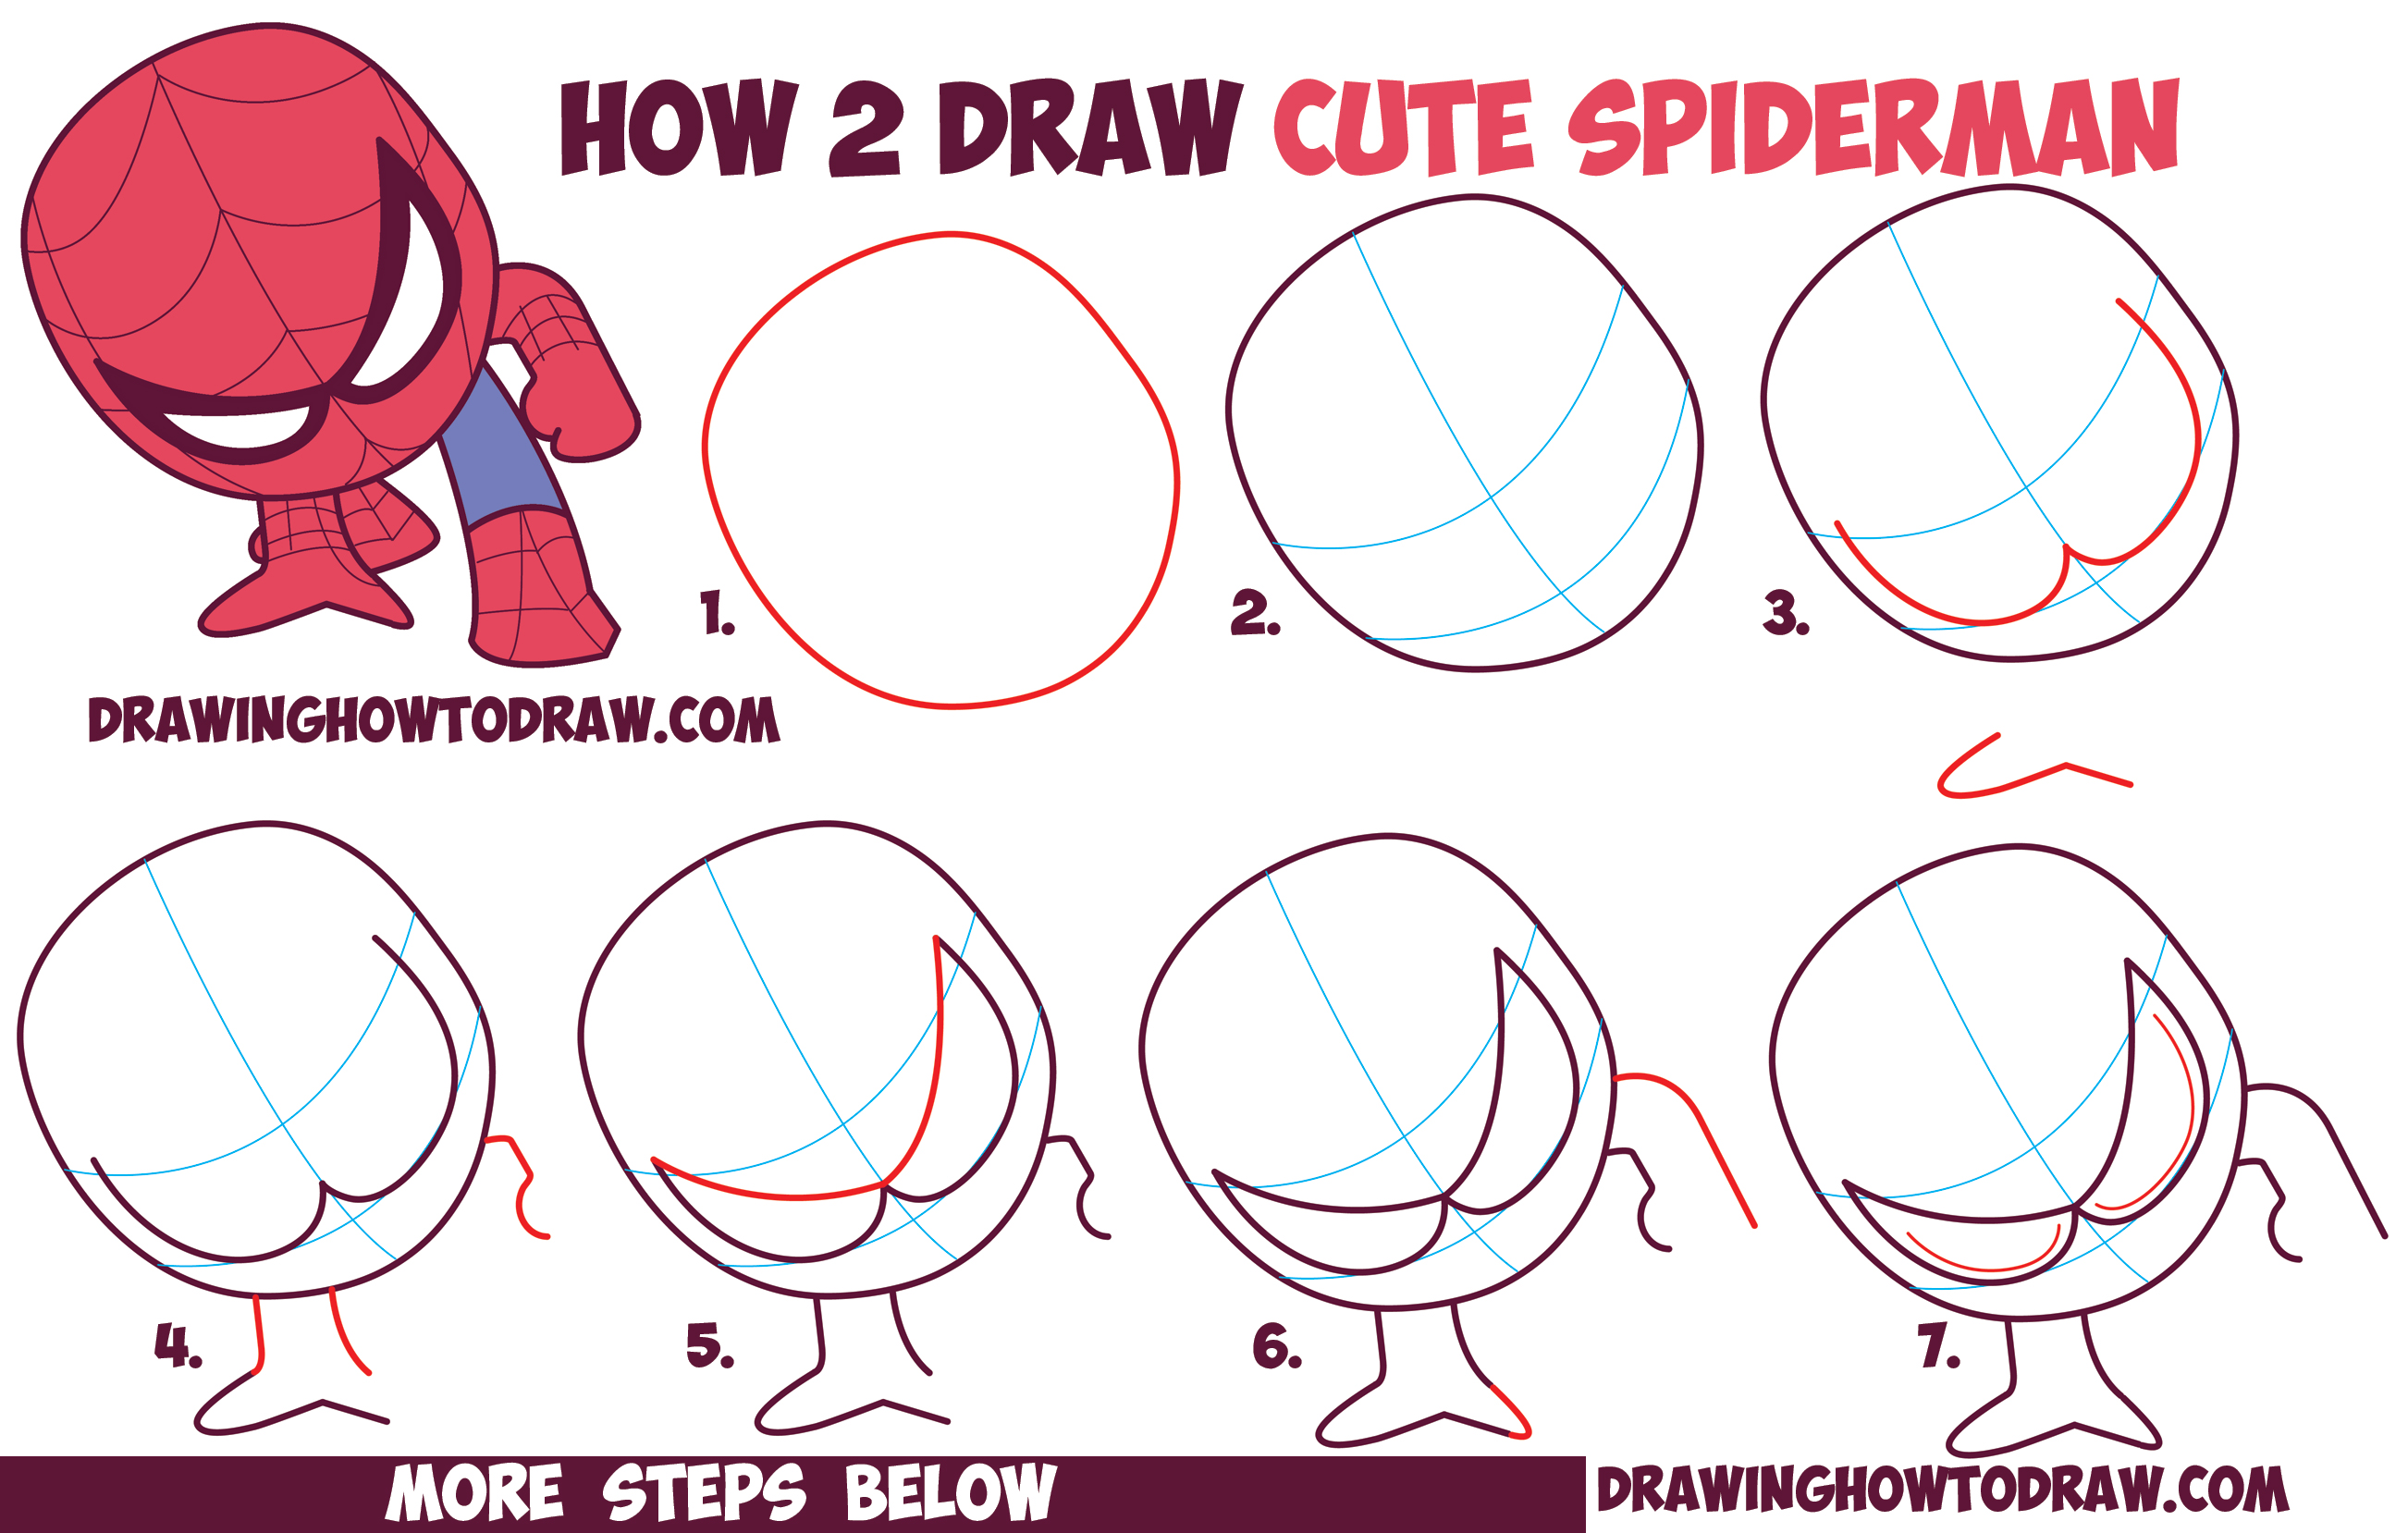 How to Draw Cute Spiderman (Chibi / Kawaii) Easy Step by Step Drawing Tutorial for Kids